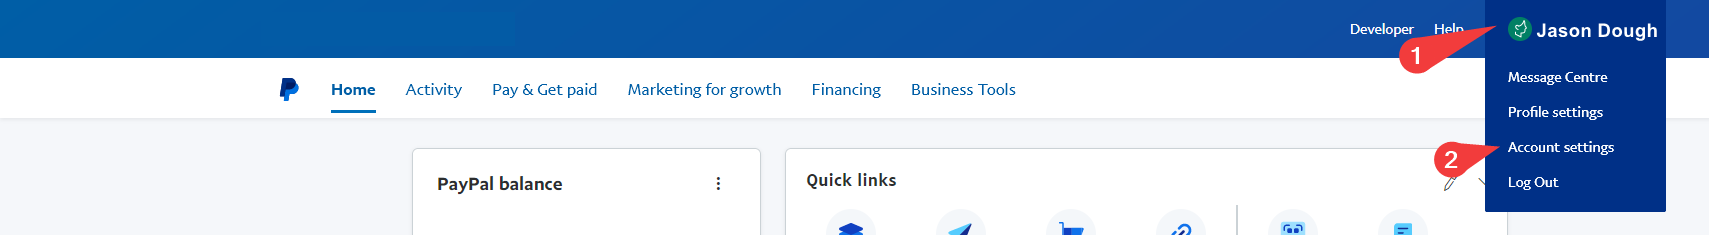 PayPal Account Settings button